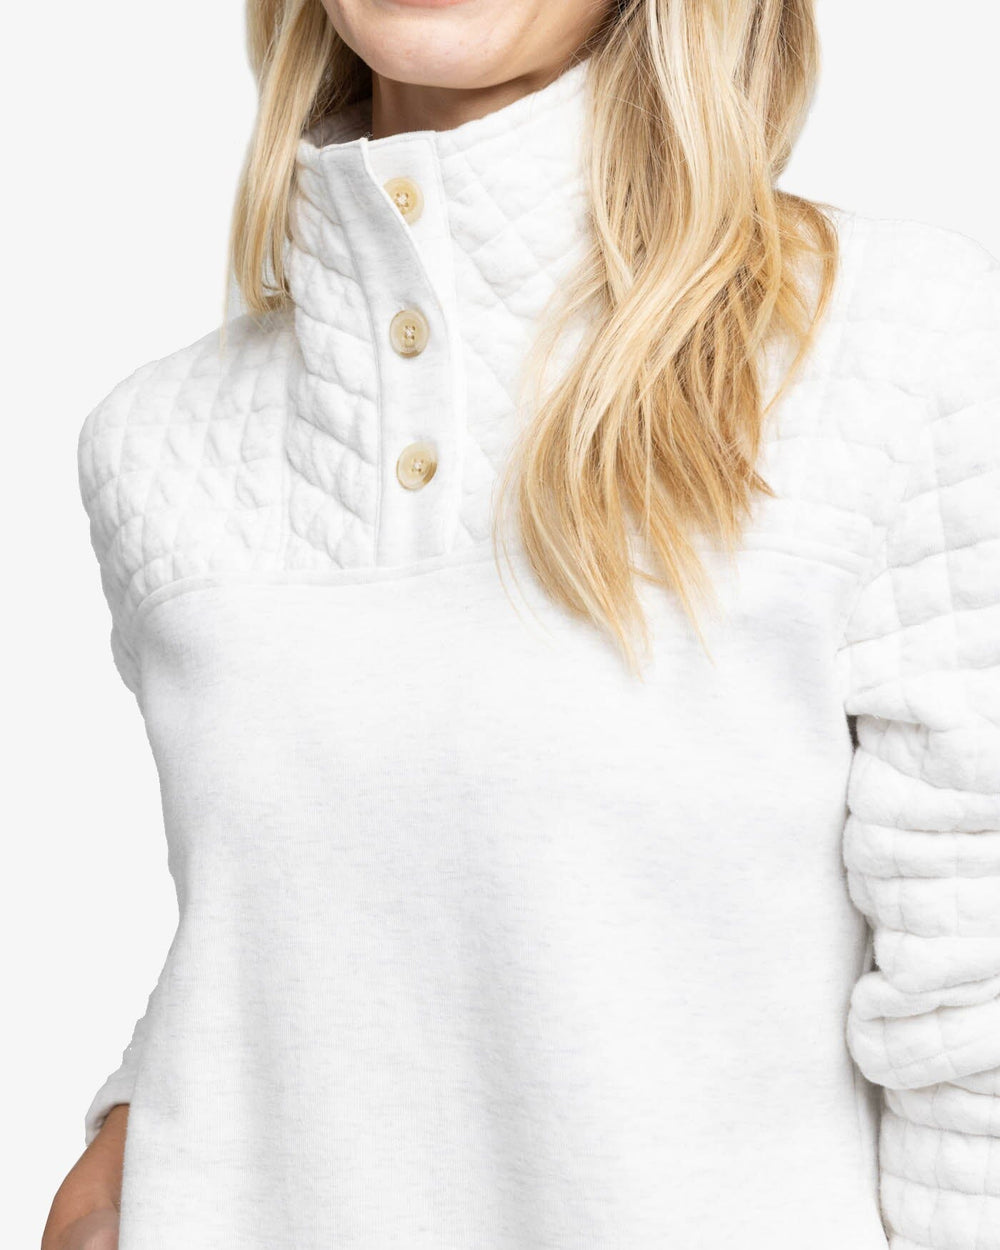 Kelsea Quilted Heather Pullover